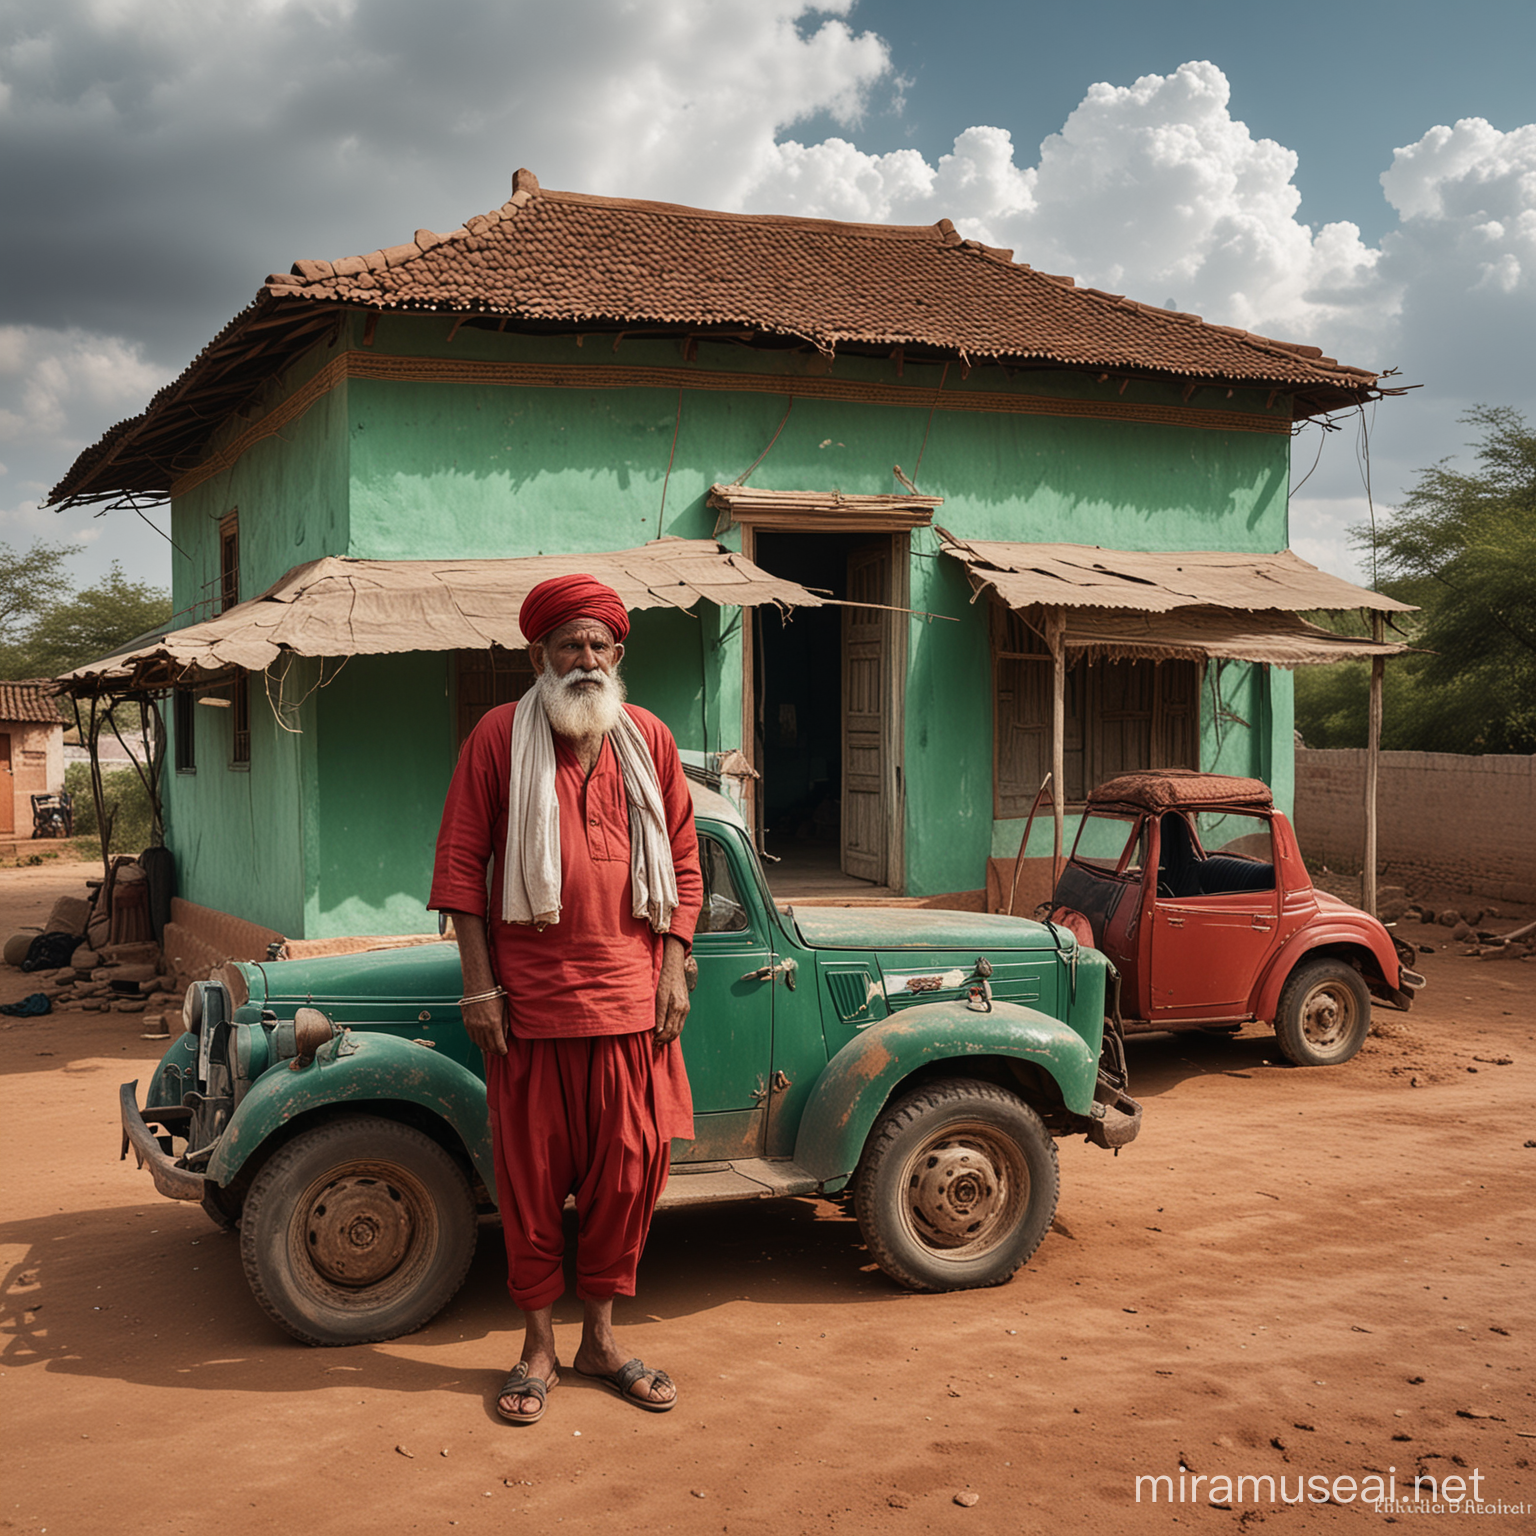 Rabari Farmer Standing by Old Rajasthan House with Vintage Car under Cloudy Sky